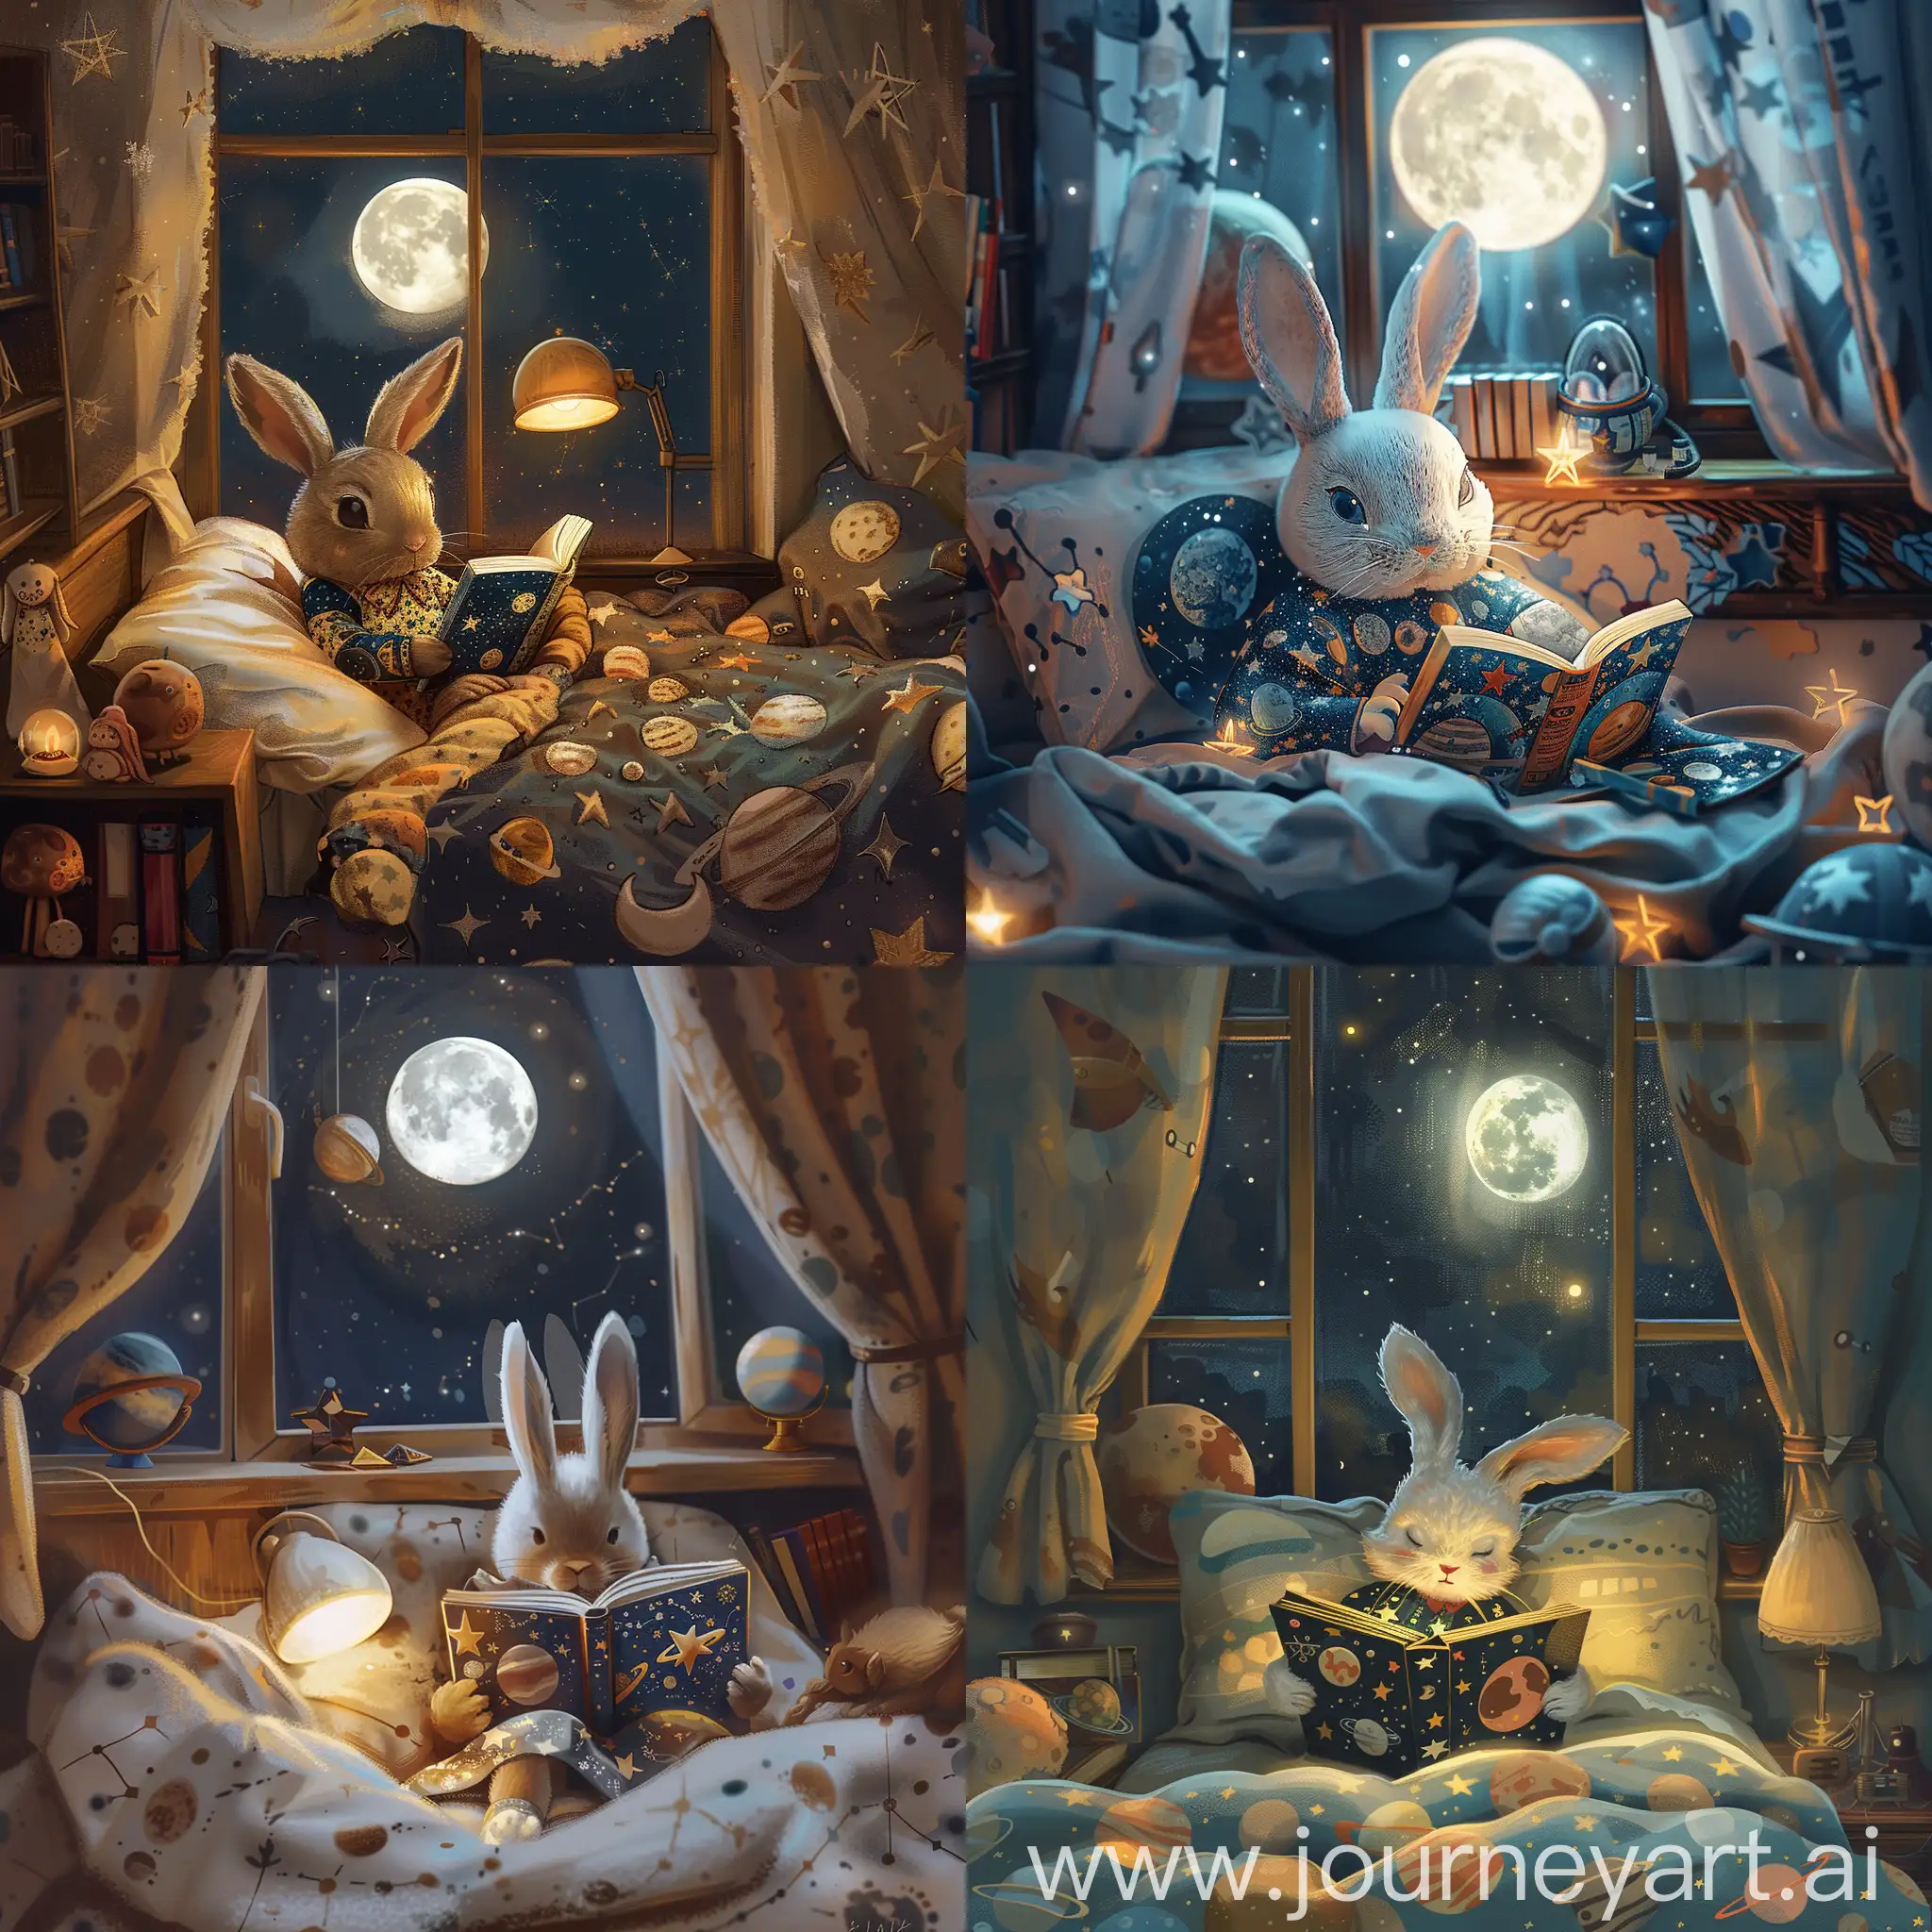 Cozy-Nighttime-Reading-with-Bunny-in-Spacethemed-Room